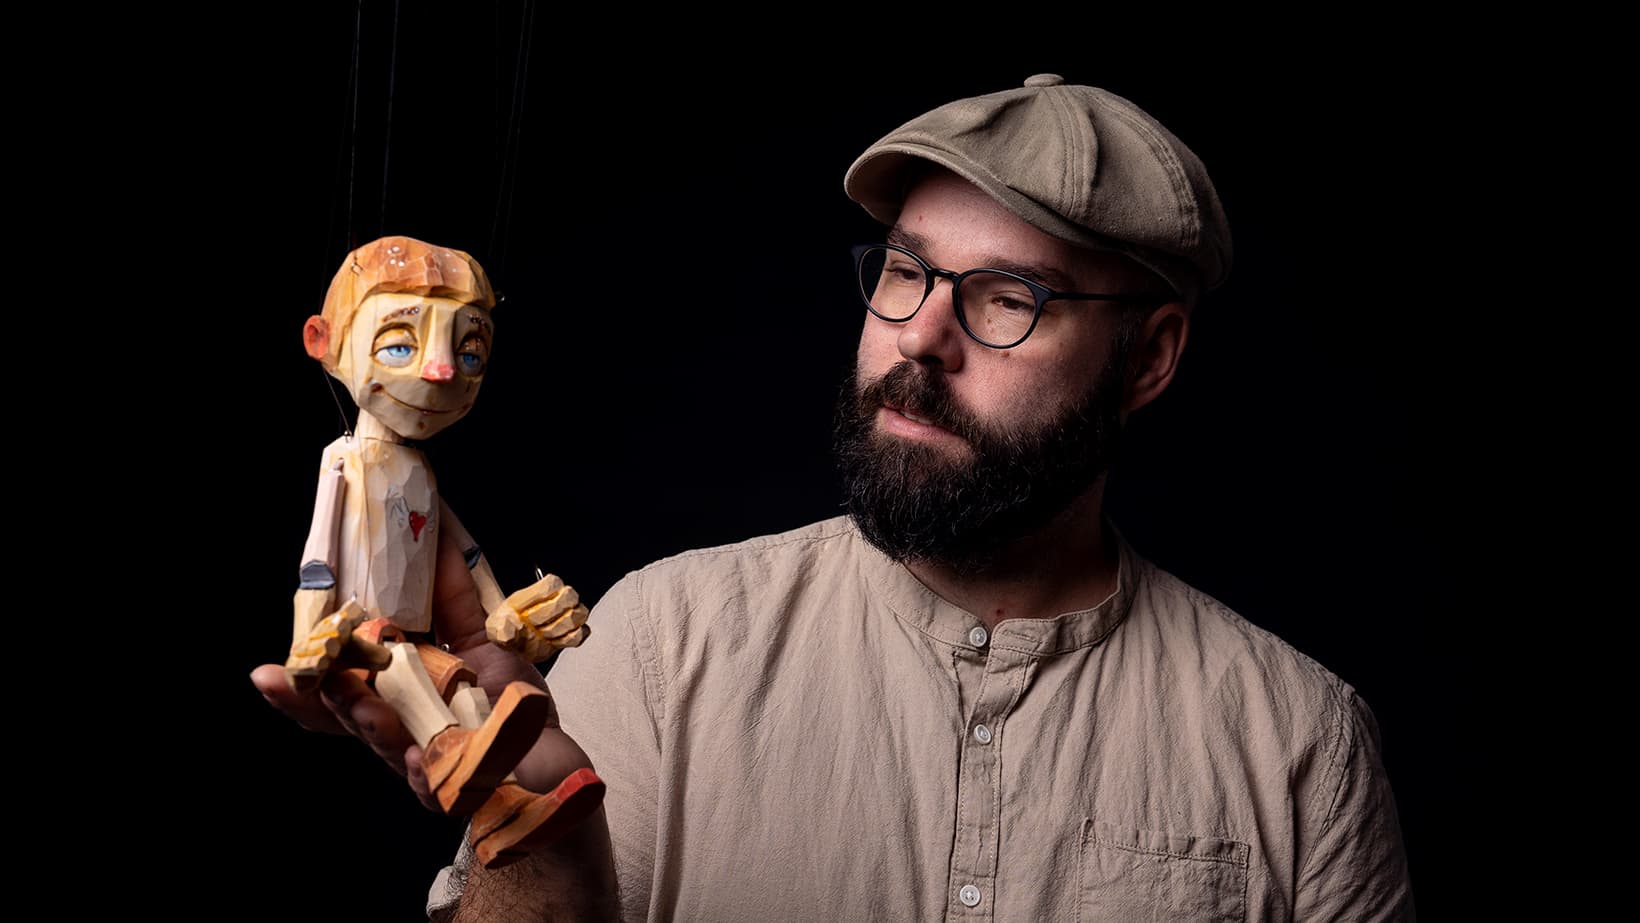 Wooden Marionettes: Making Puppets from Scratch